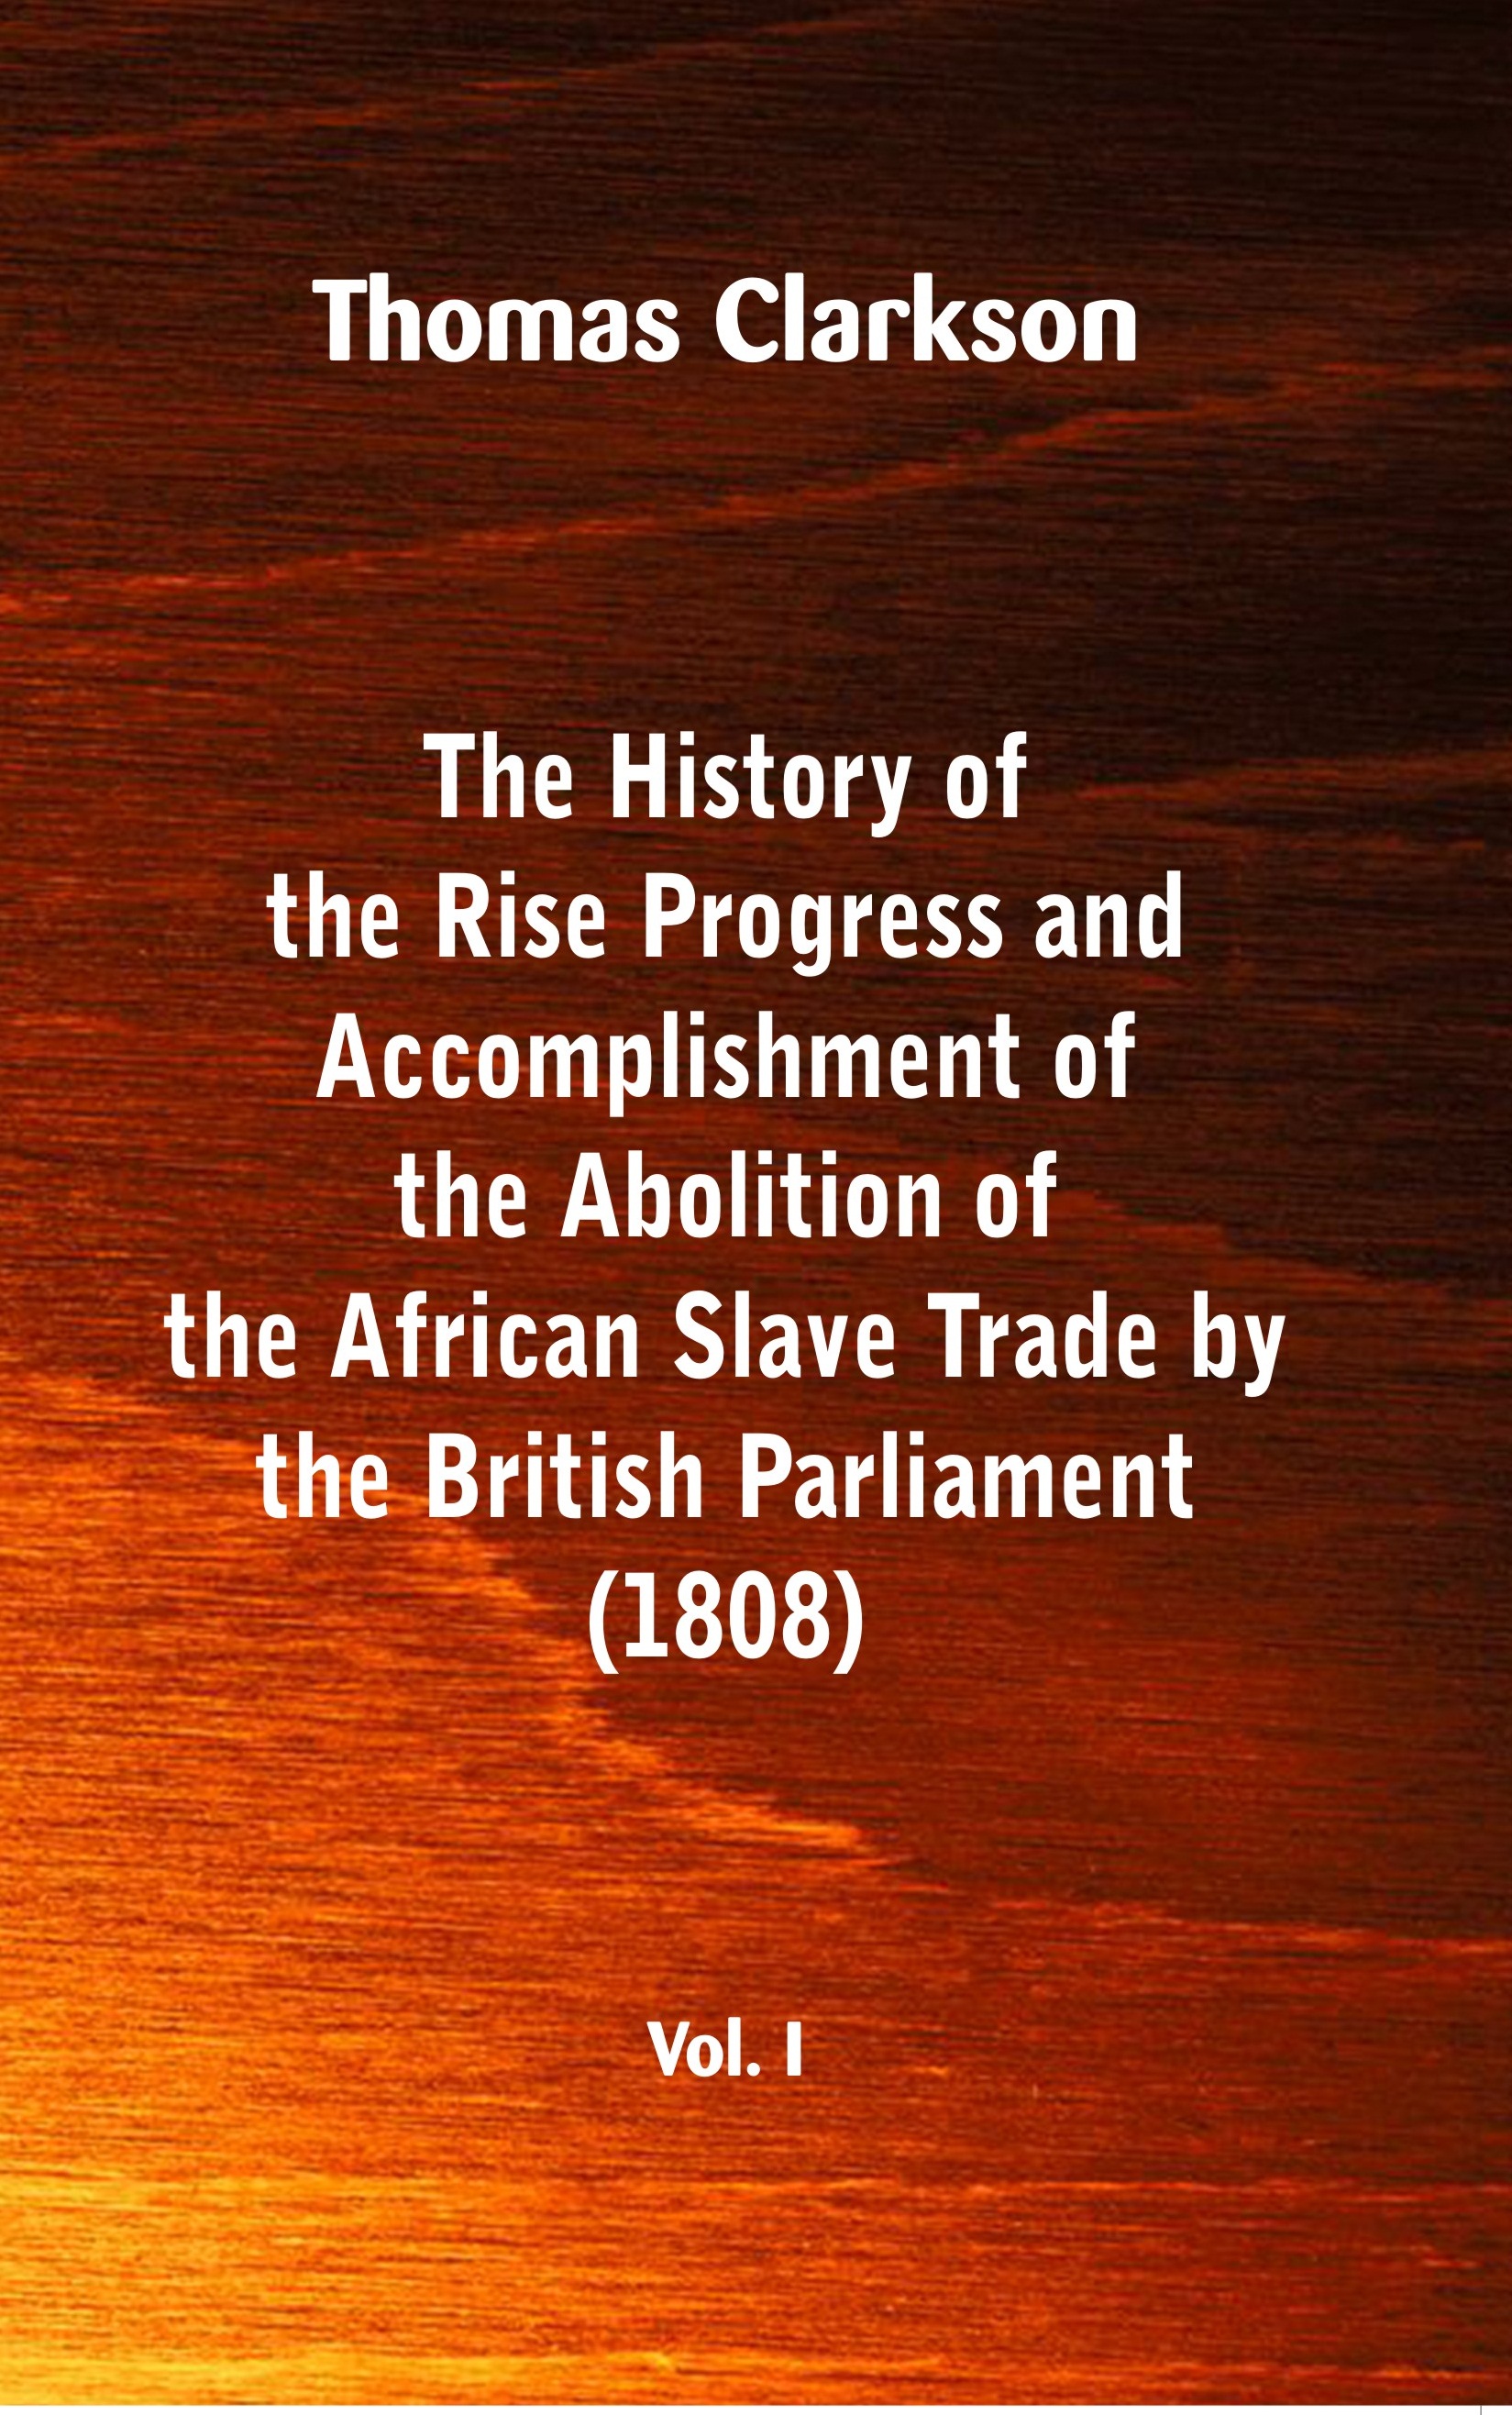 The History of the Rise, Progress and Accomplishment of the Abolition of the African Slave Trade by 